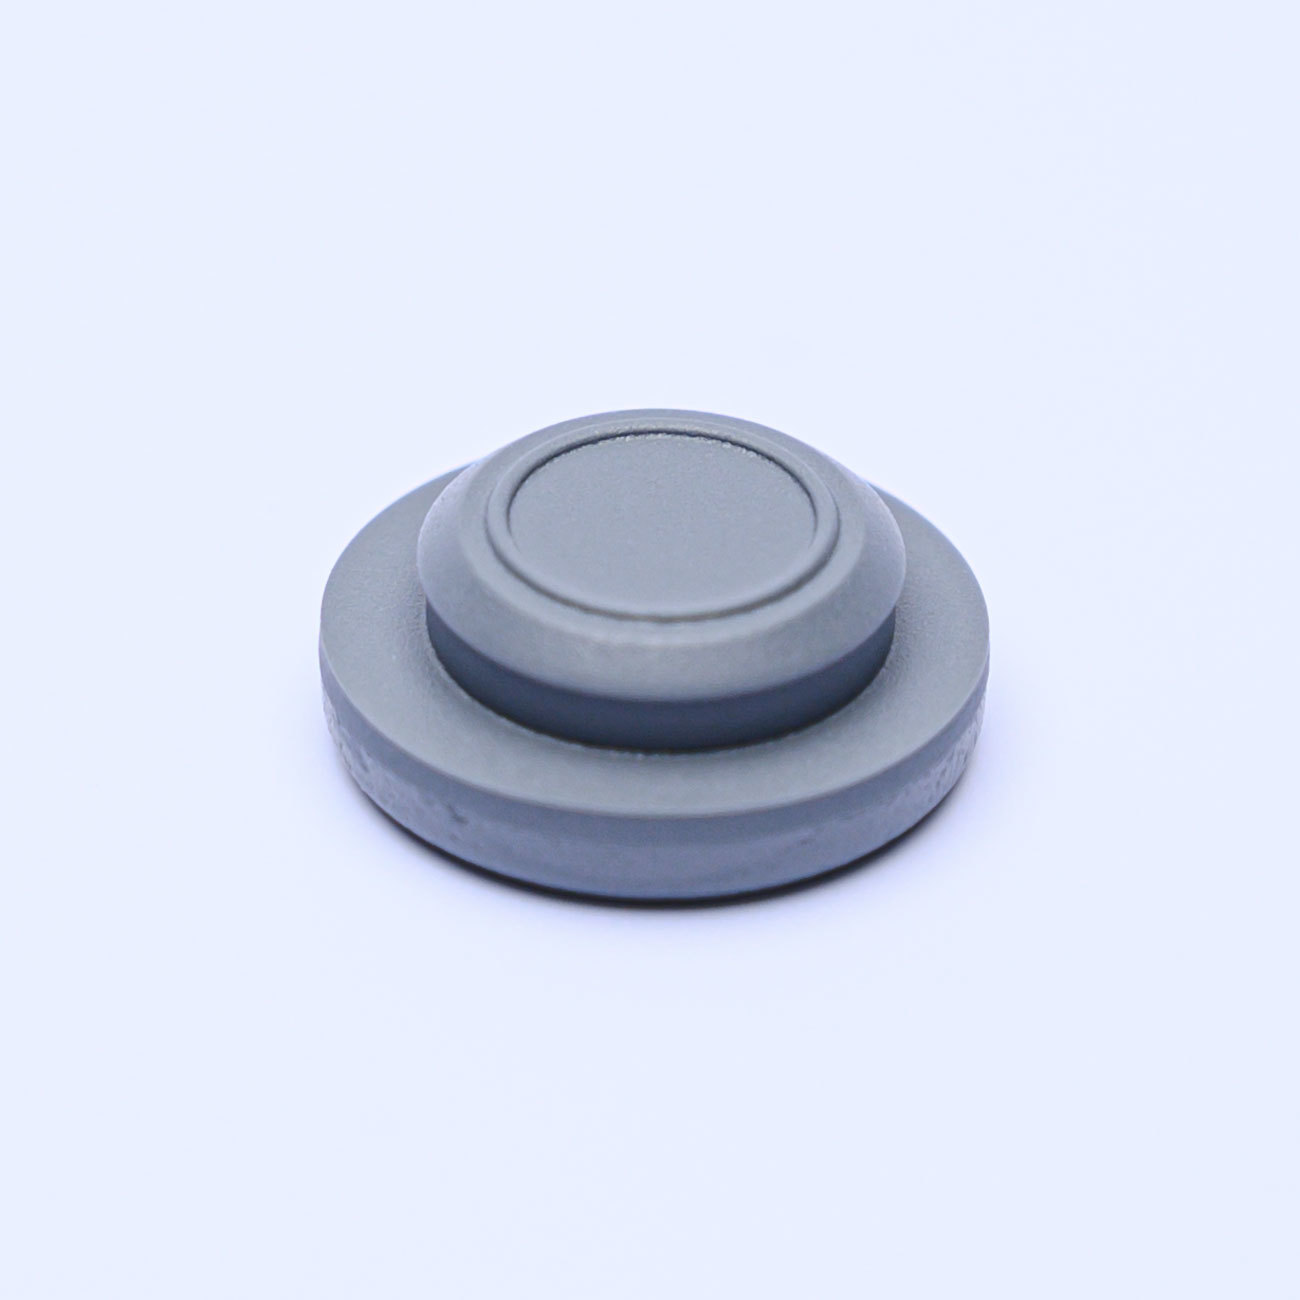 Halogenated butyl rubber stopper for injection